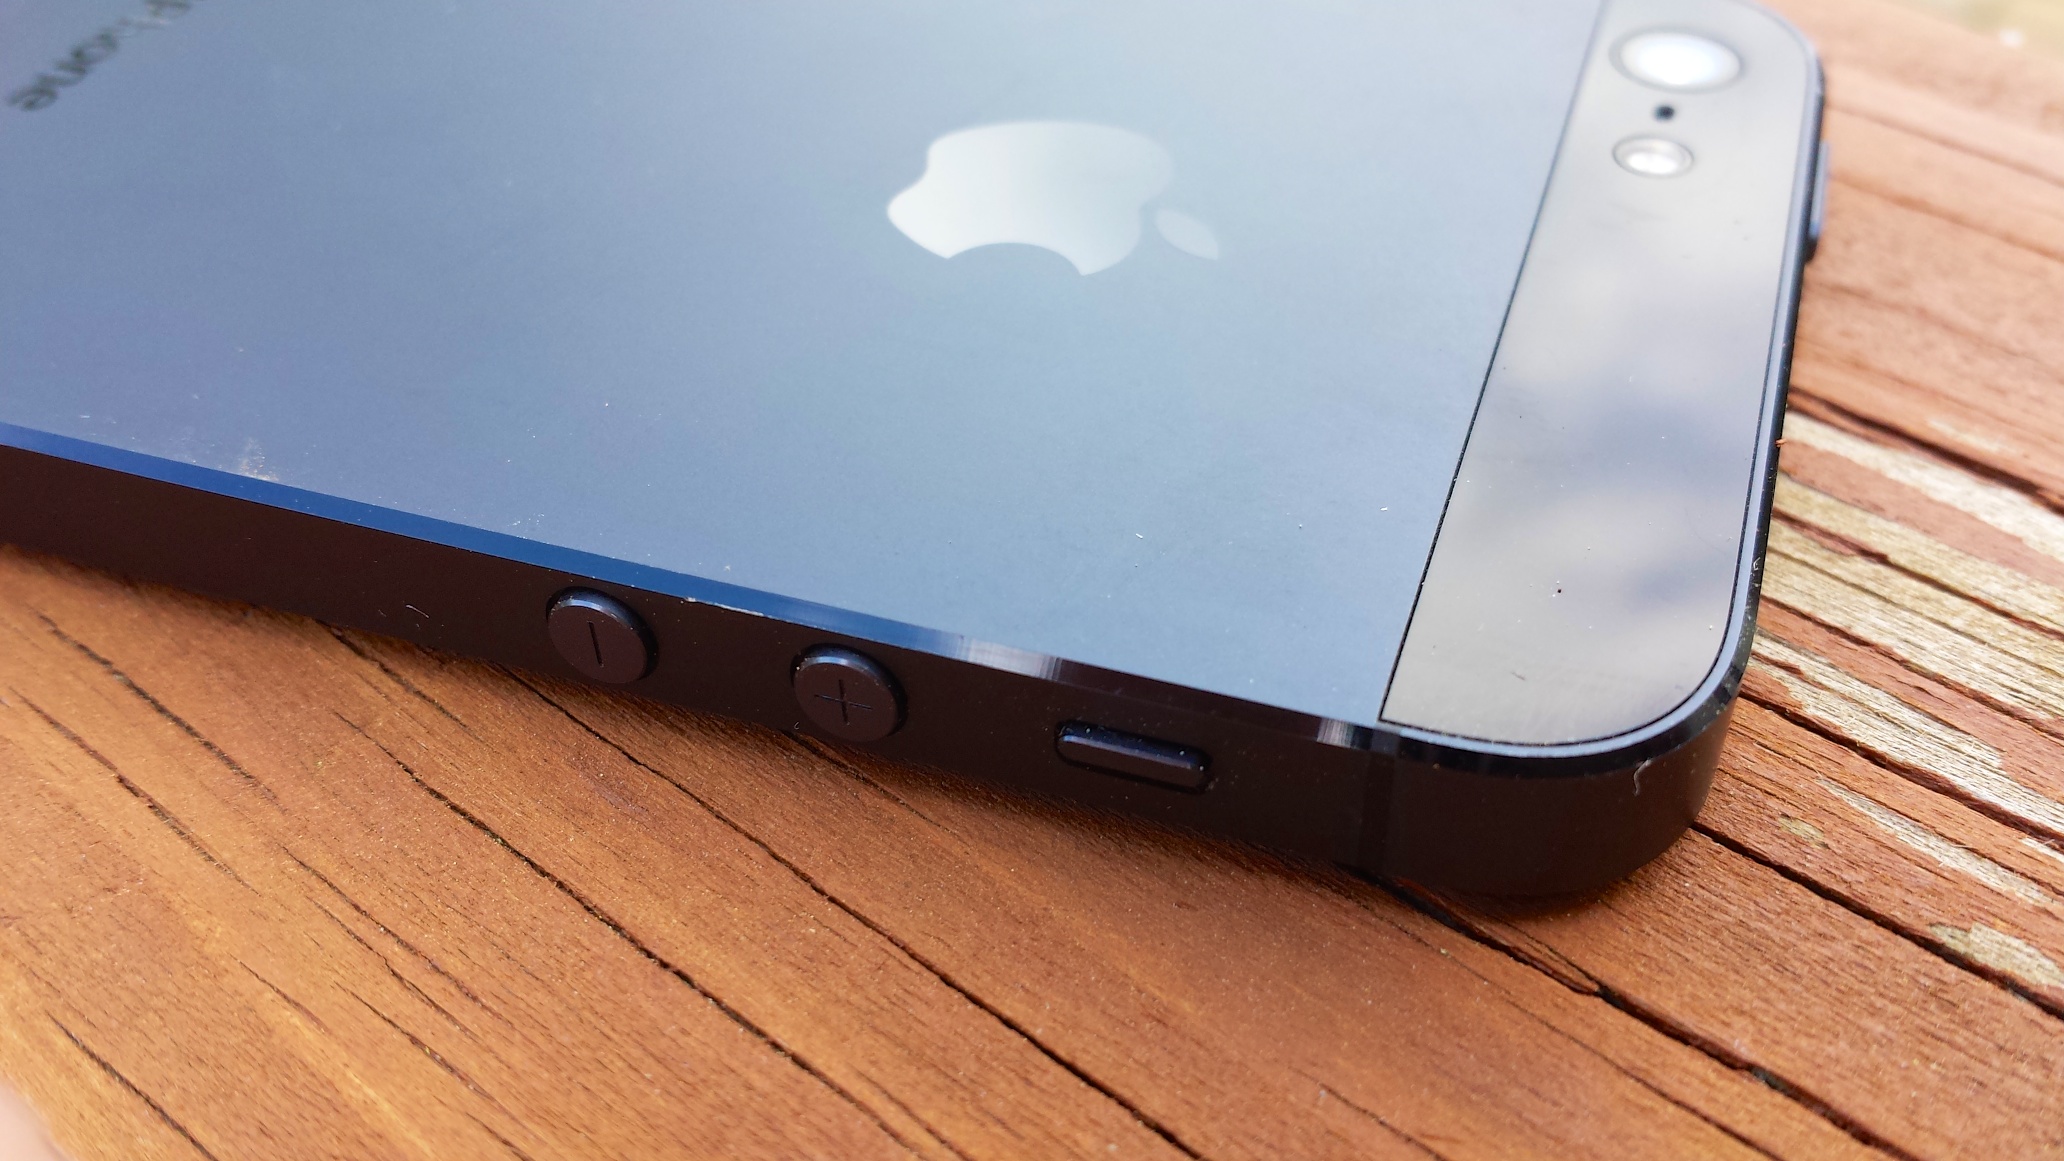 10 Common iOS 9 Problems & How to Fix Them